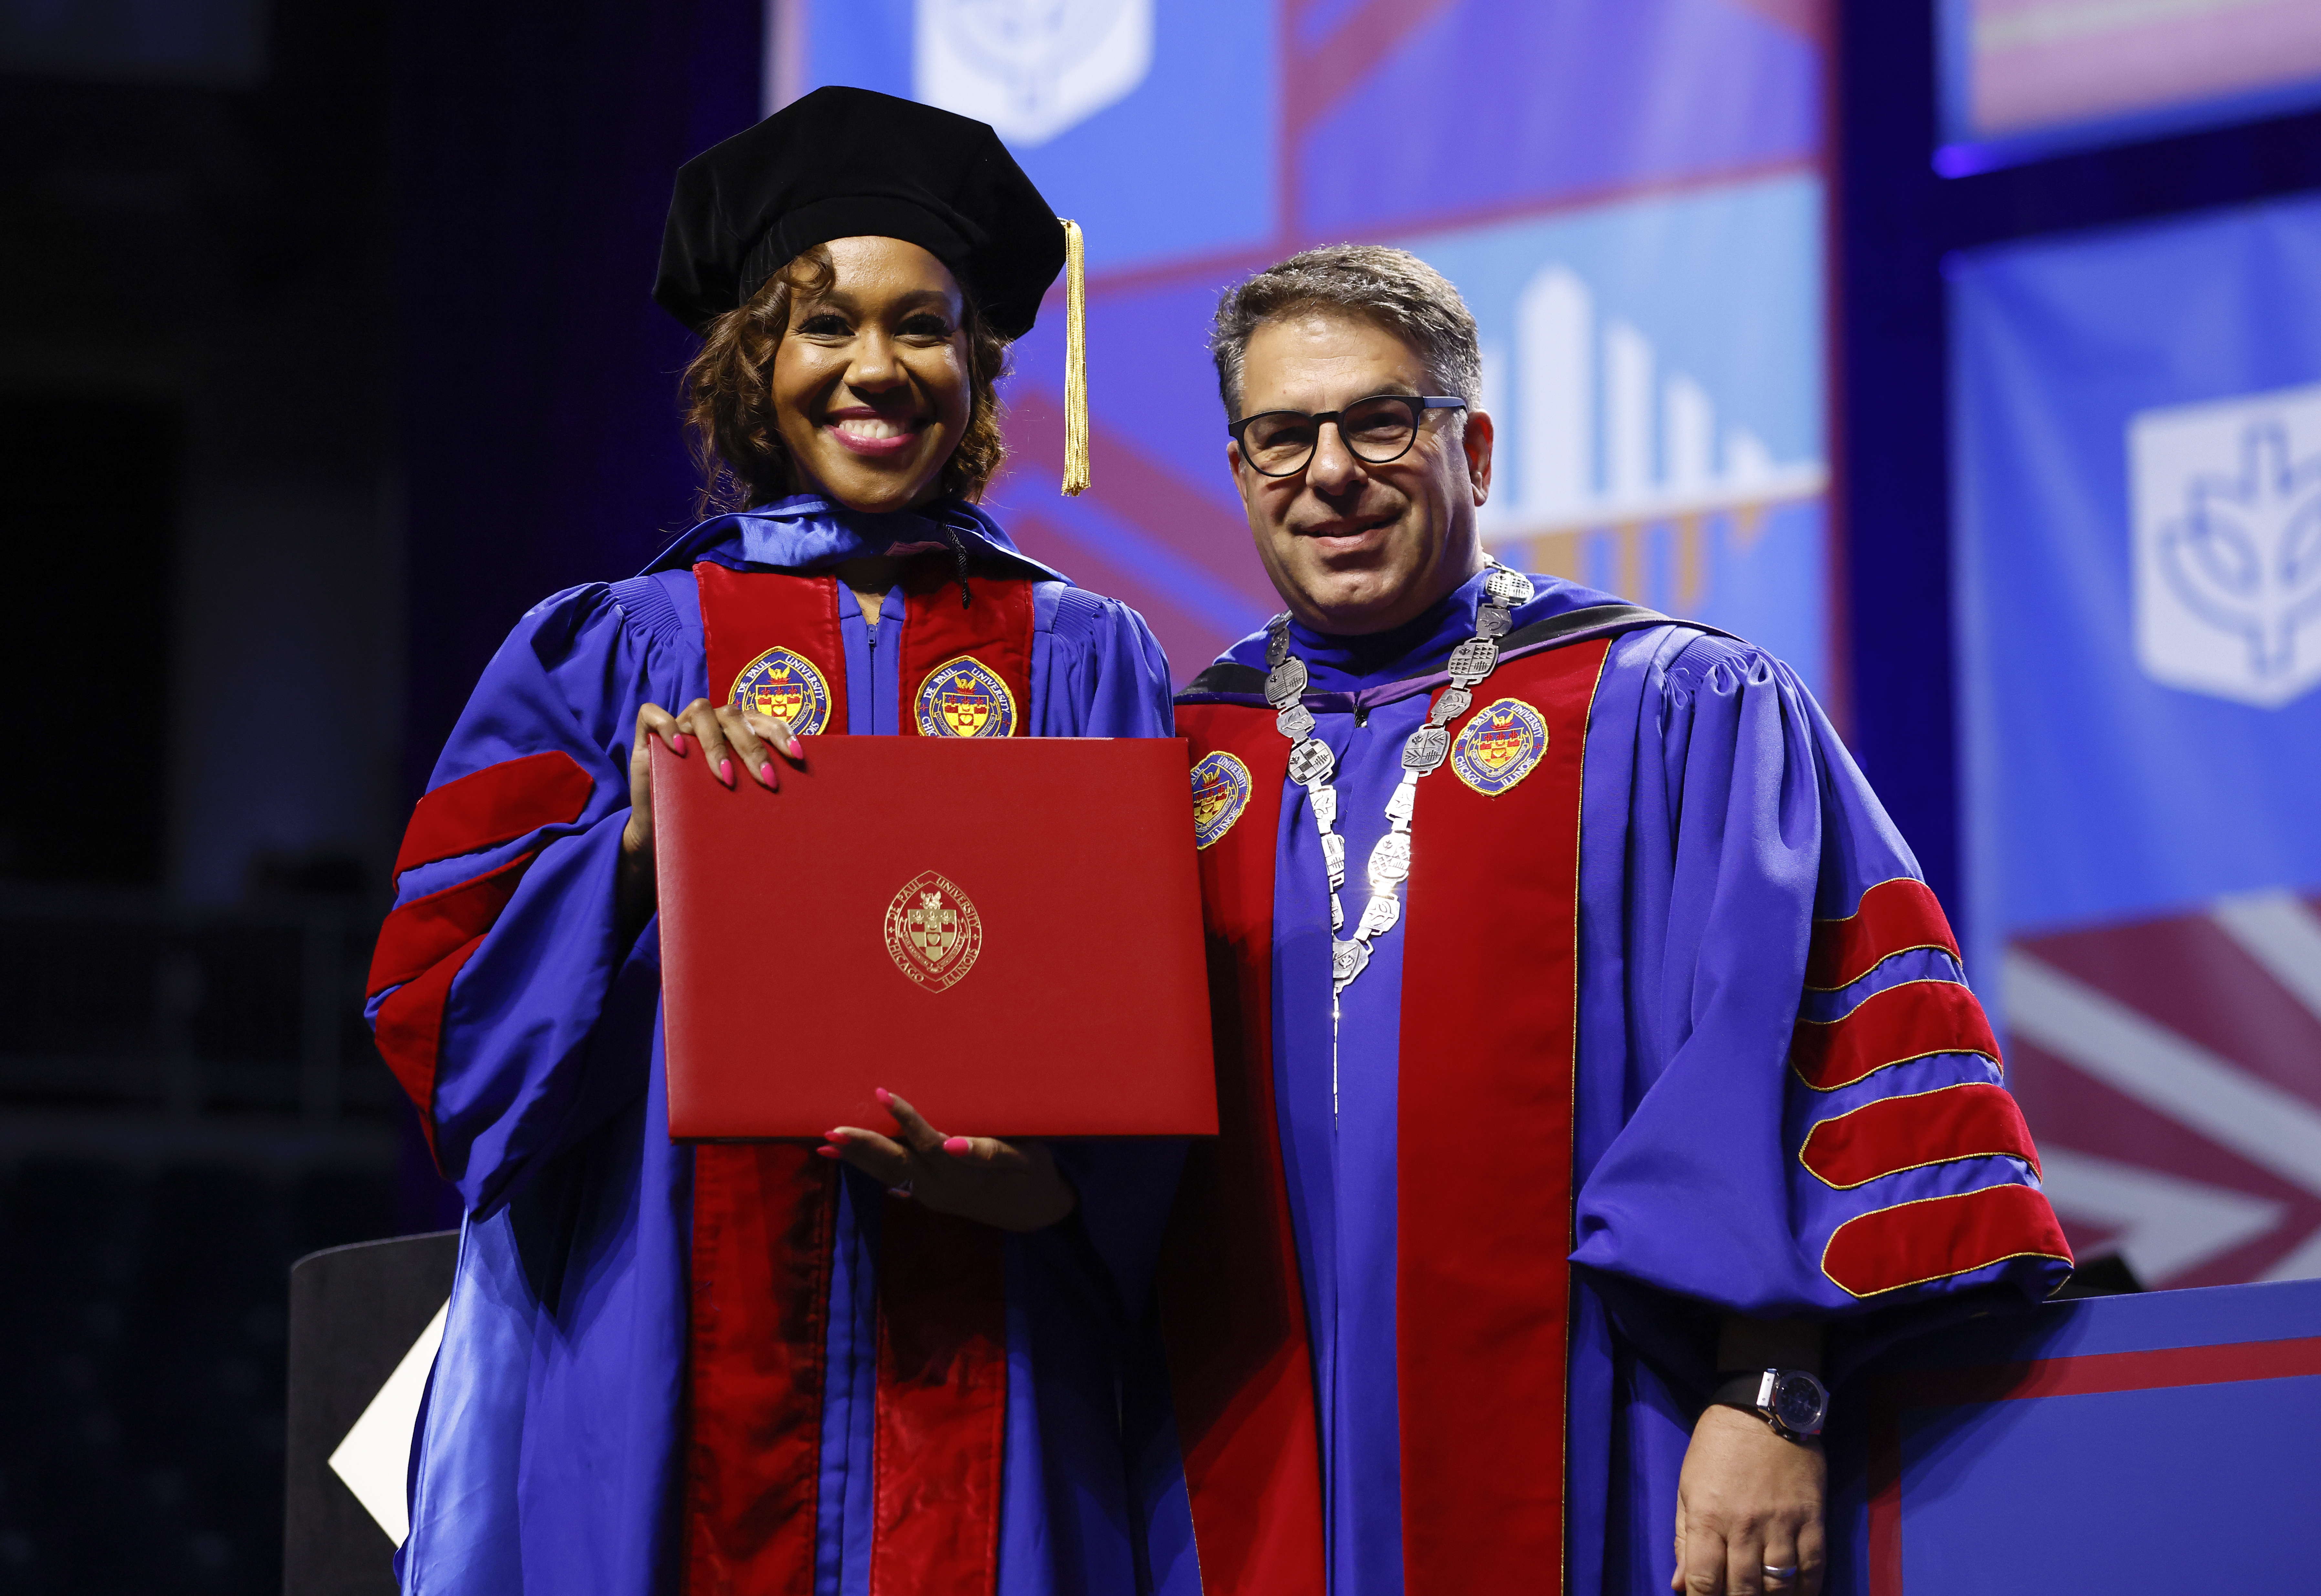 A man and woman in academic regalia